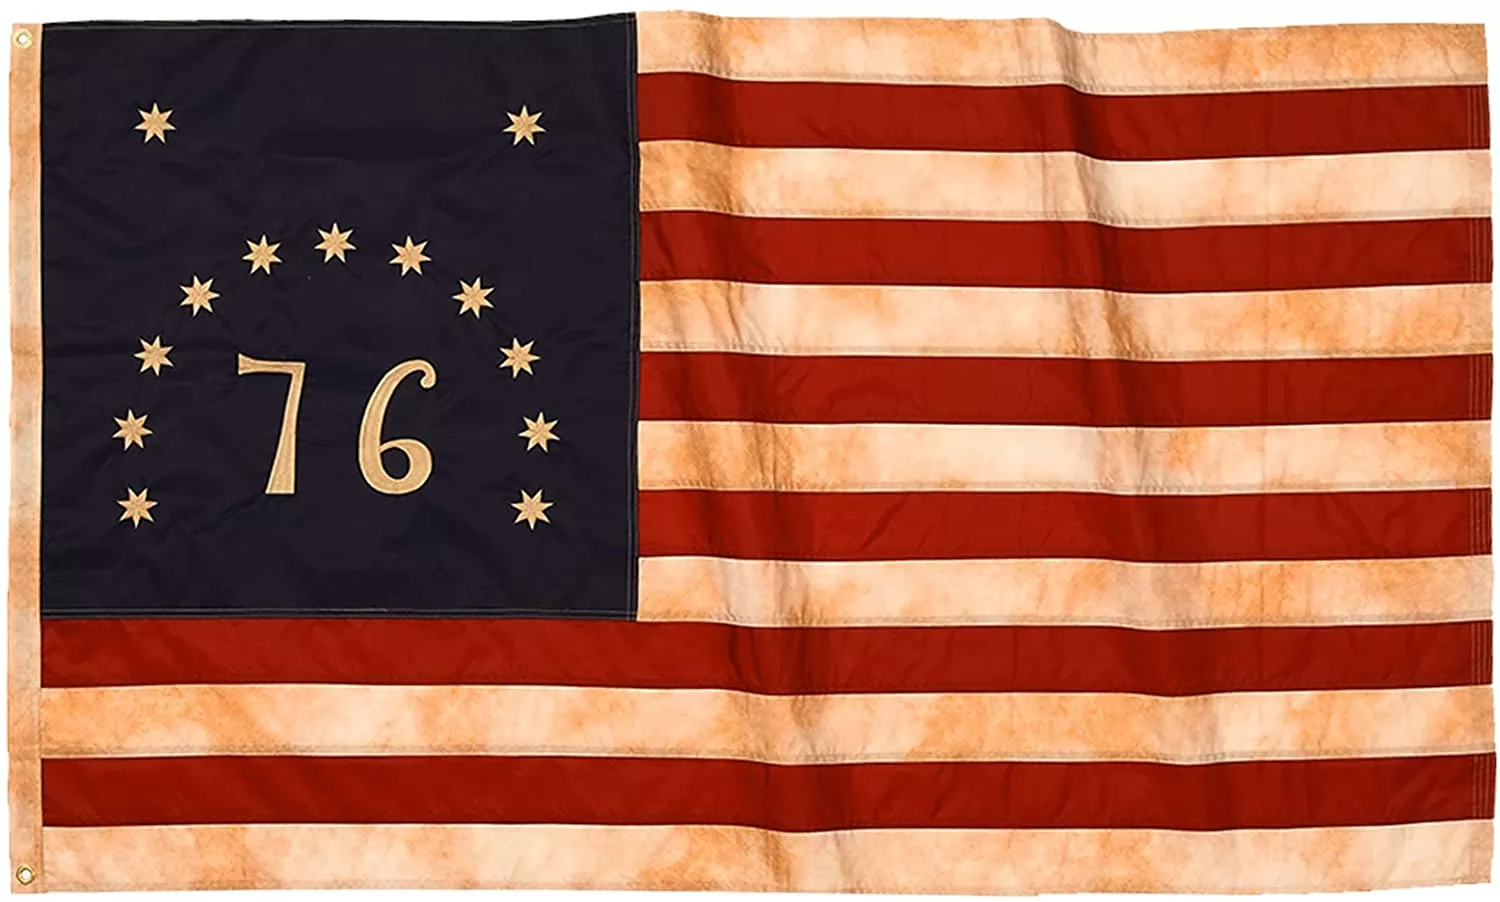 Homissor Tea Stained Bennington 1776 Flag 3x5 Embroidered- 100% Durable Polyester Heavy Duty Primitive Vintage 76 Flags Banner with 2 Brass Metal Grom